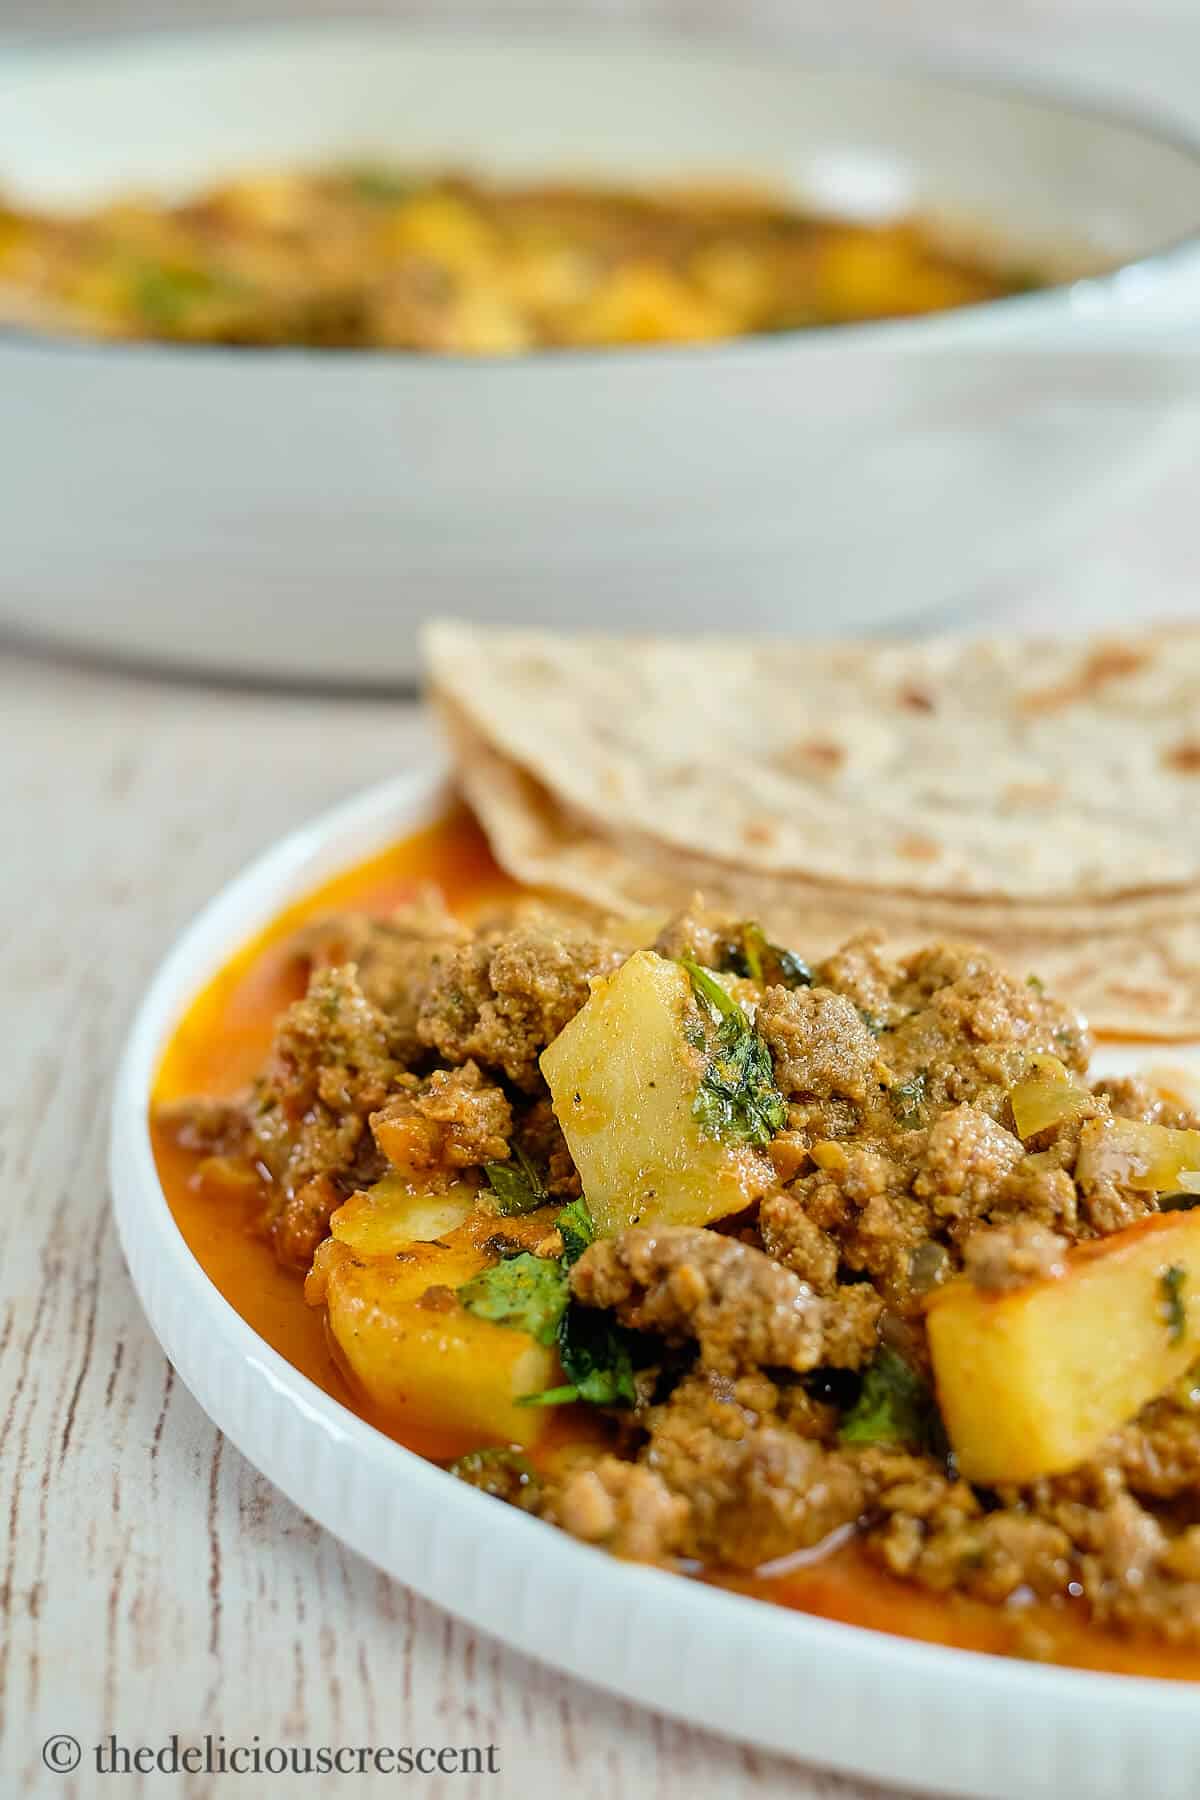 Ground beef curry served with flatbreads in a plate.